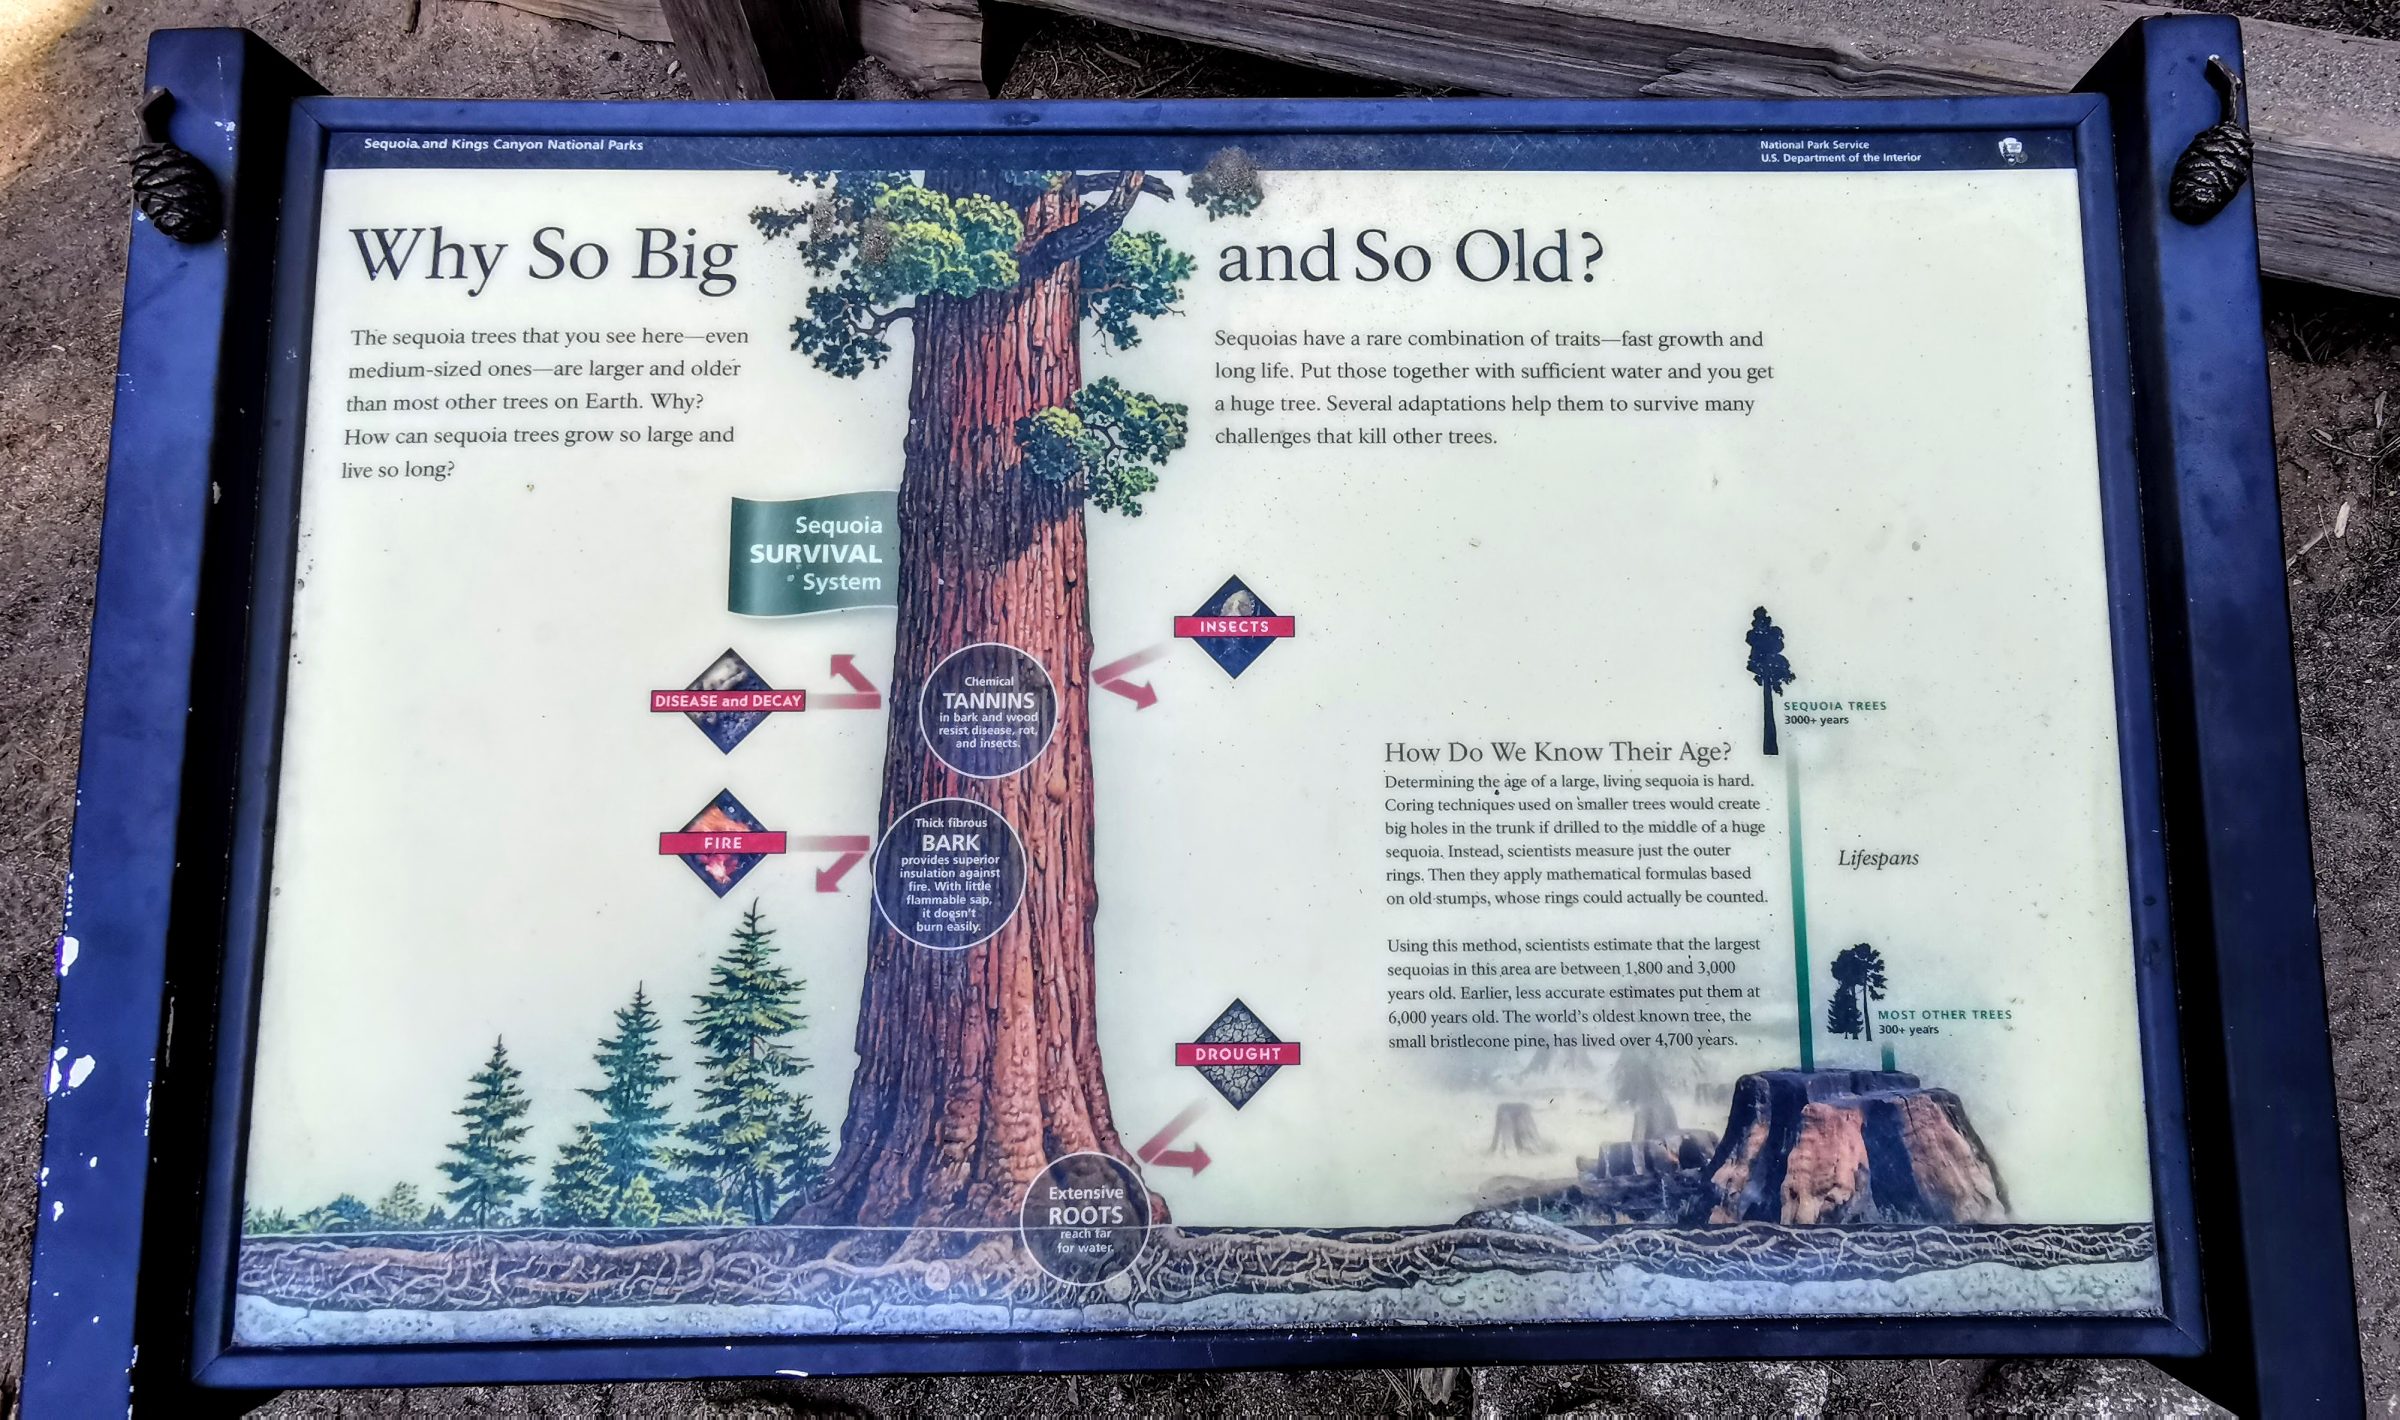 Why are Sequoia trees so old and tall?